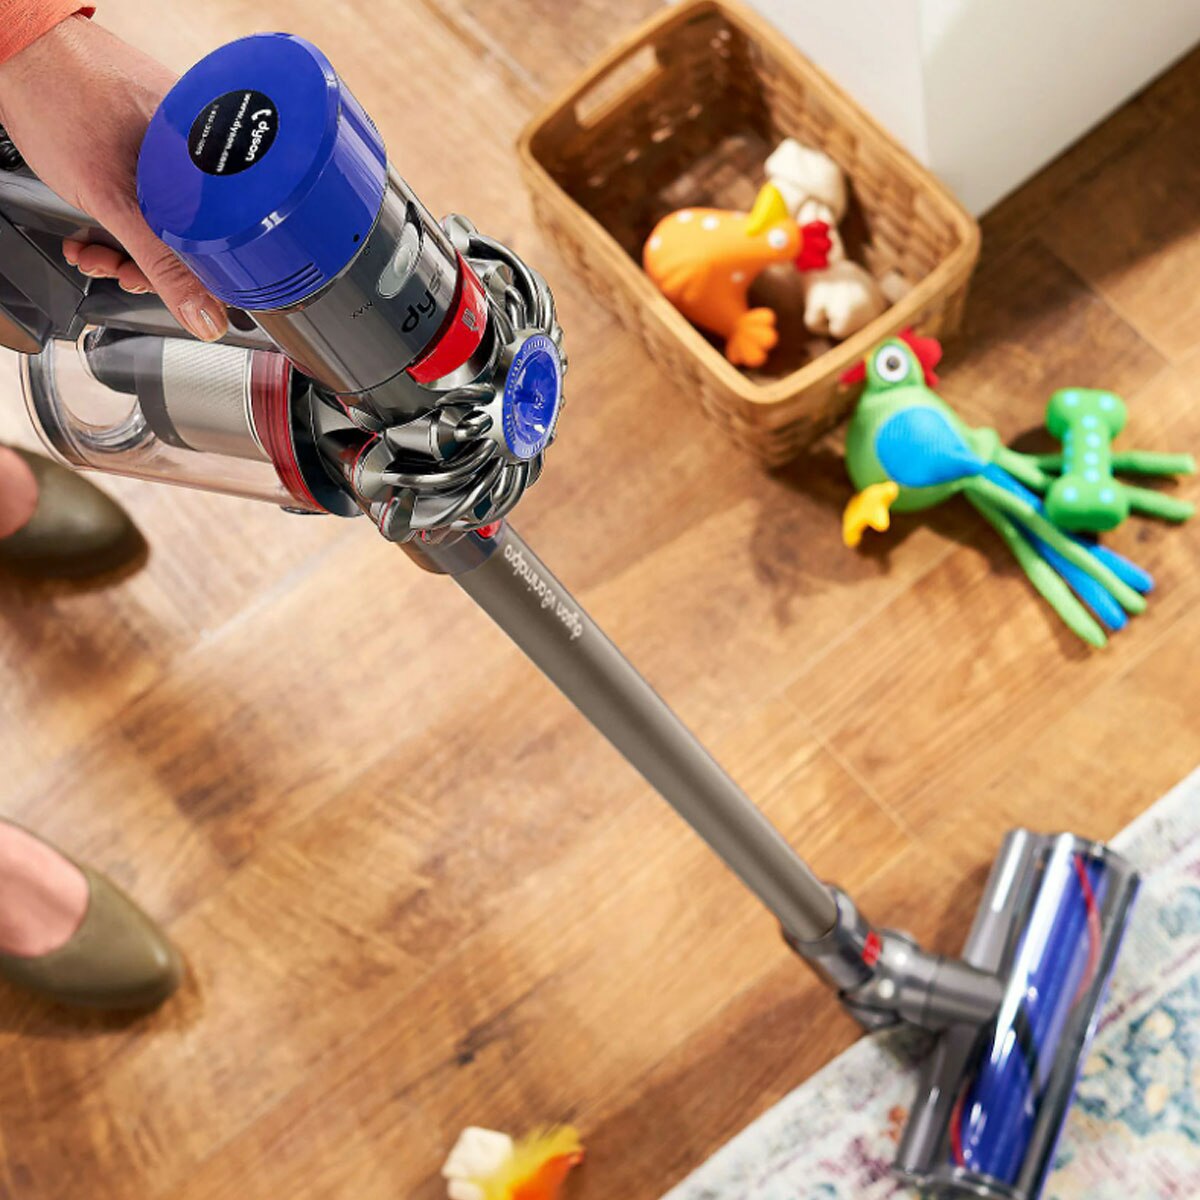 Save $100 On This Dyson V8 Cordless Vacuum Deal Before It Sells